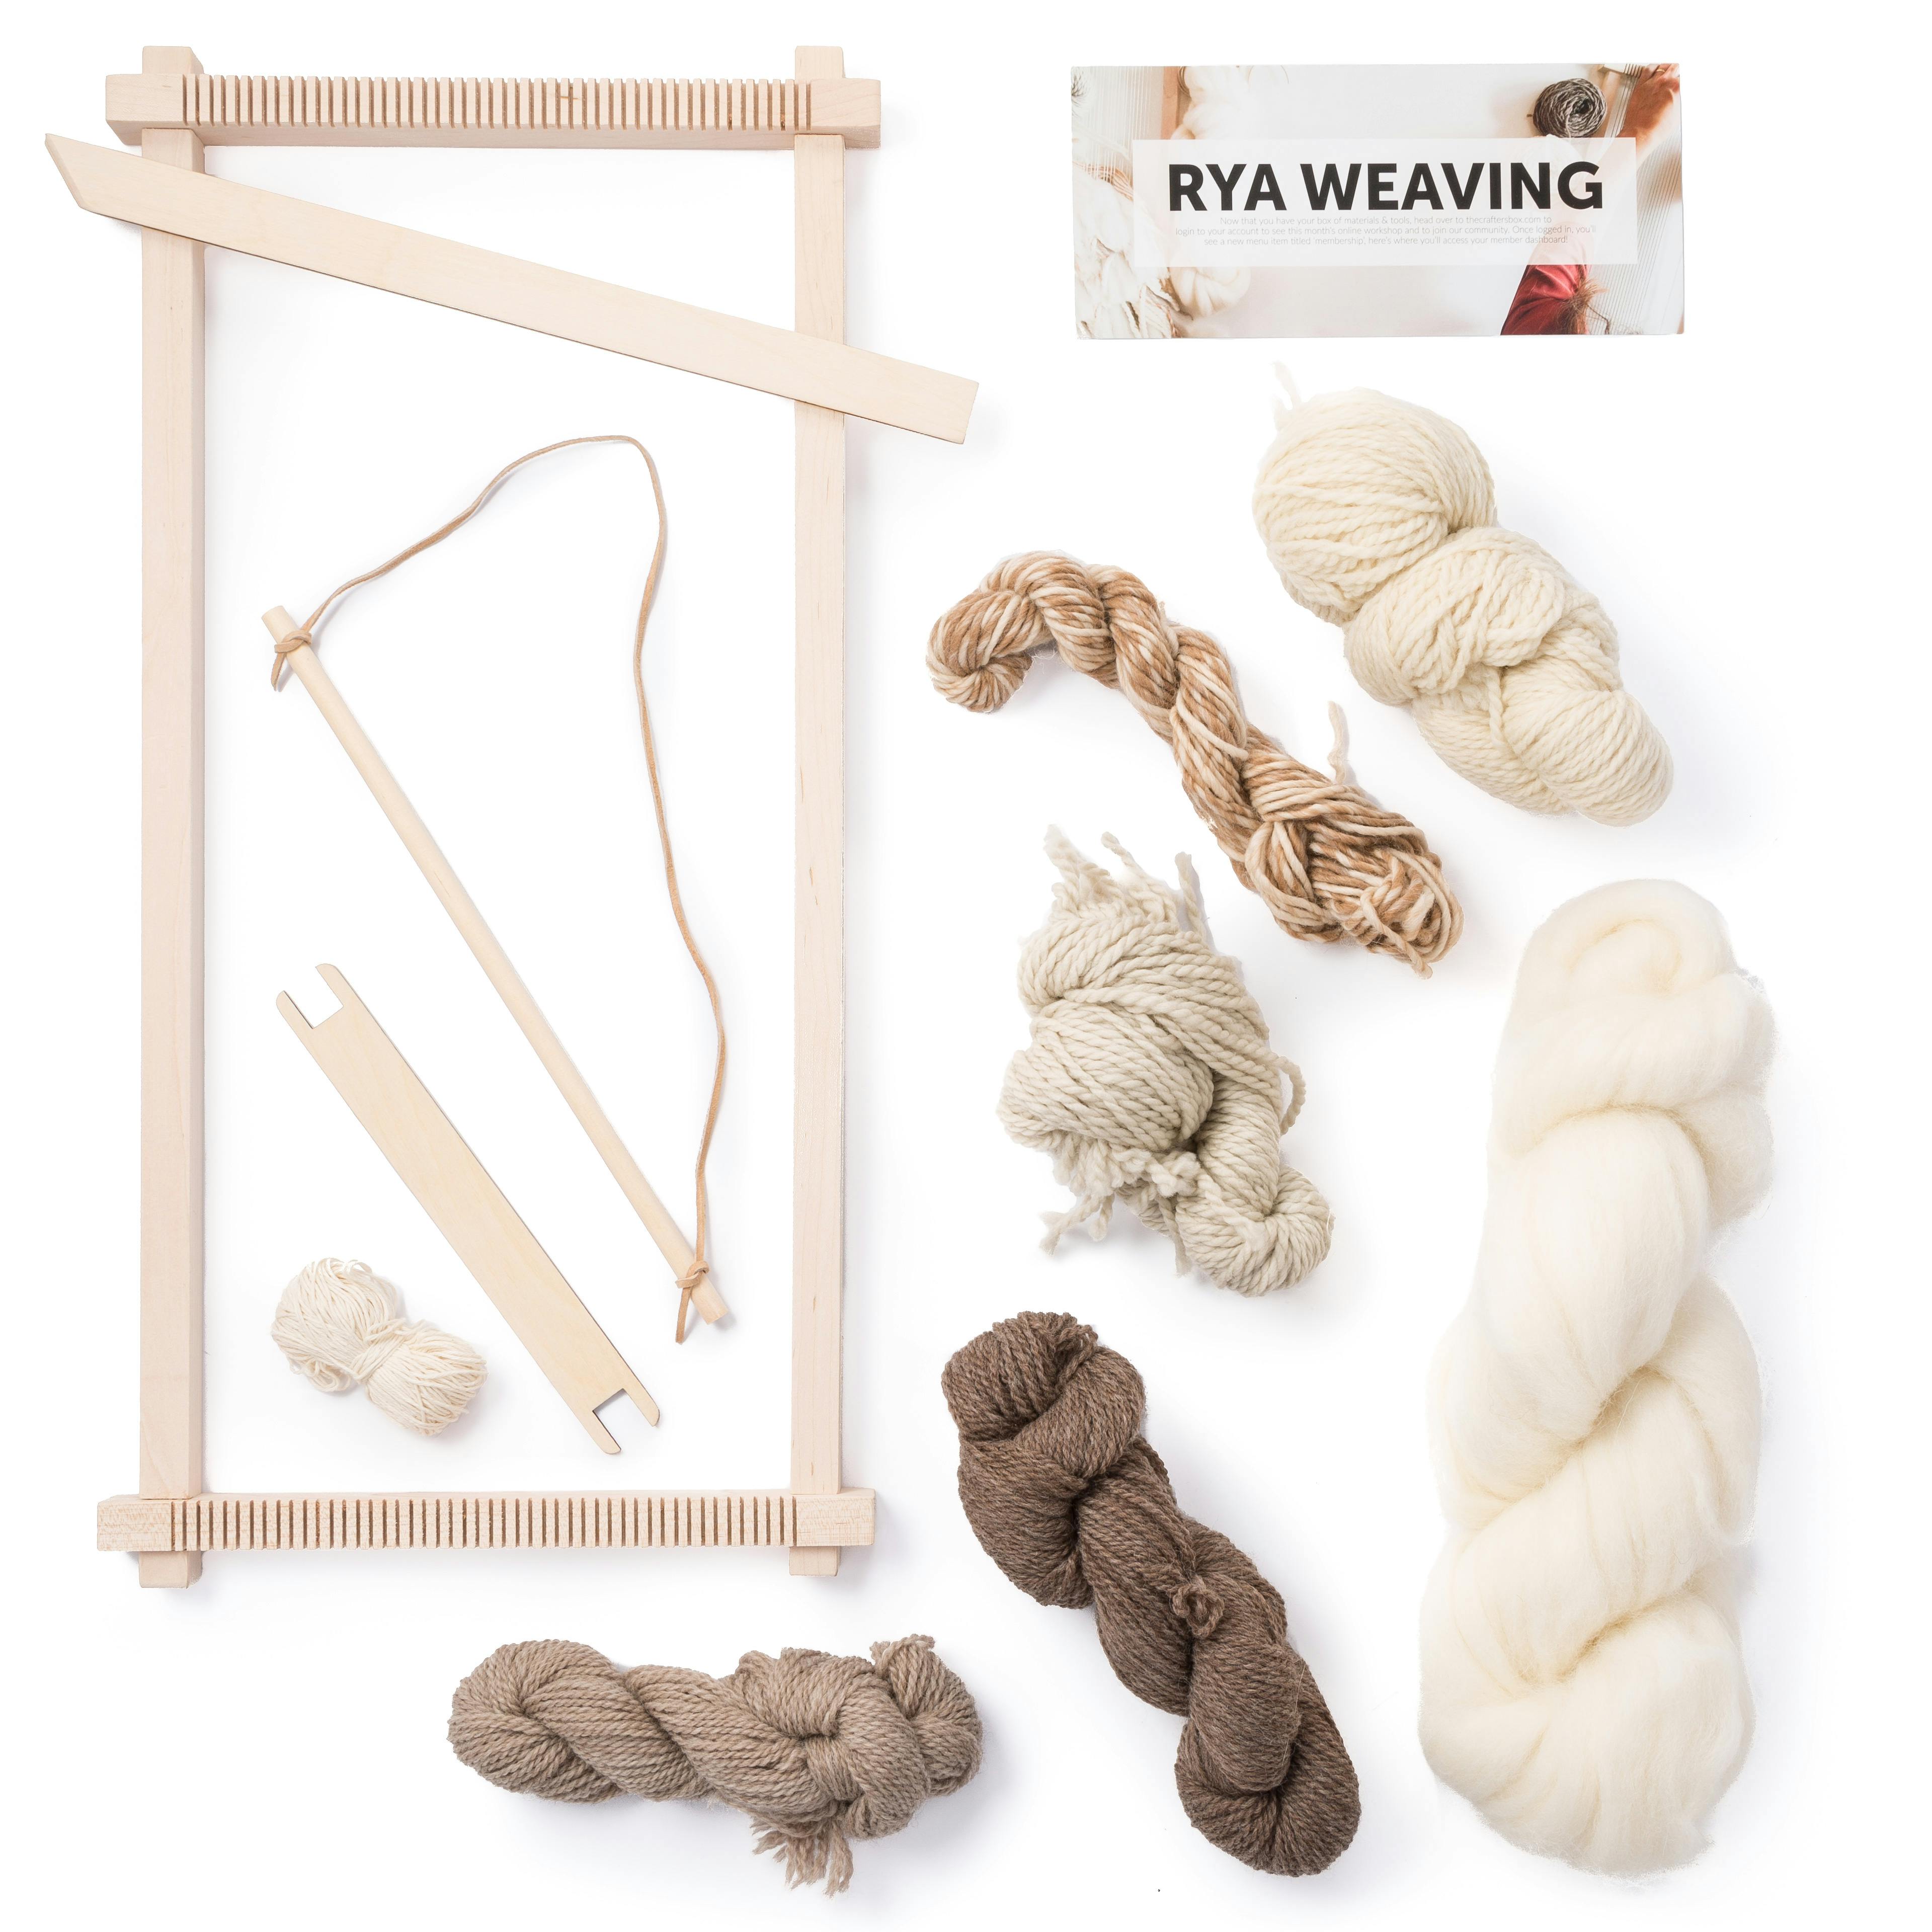 The Crafter's Box Rya Weaving Kit